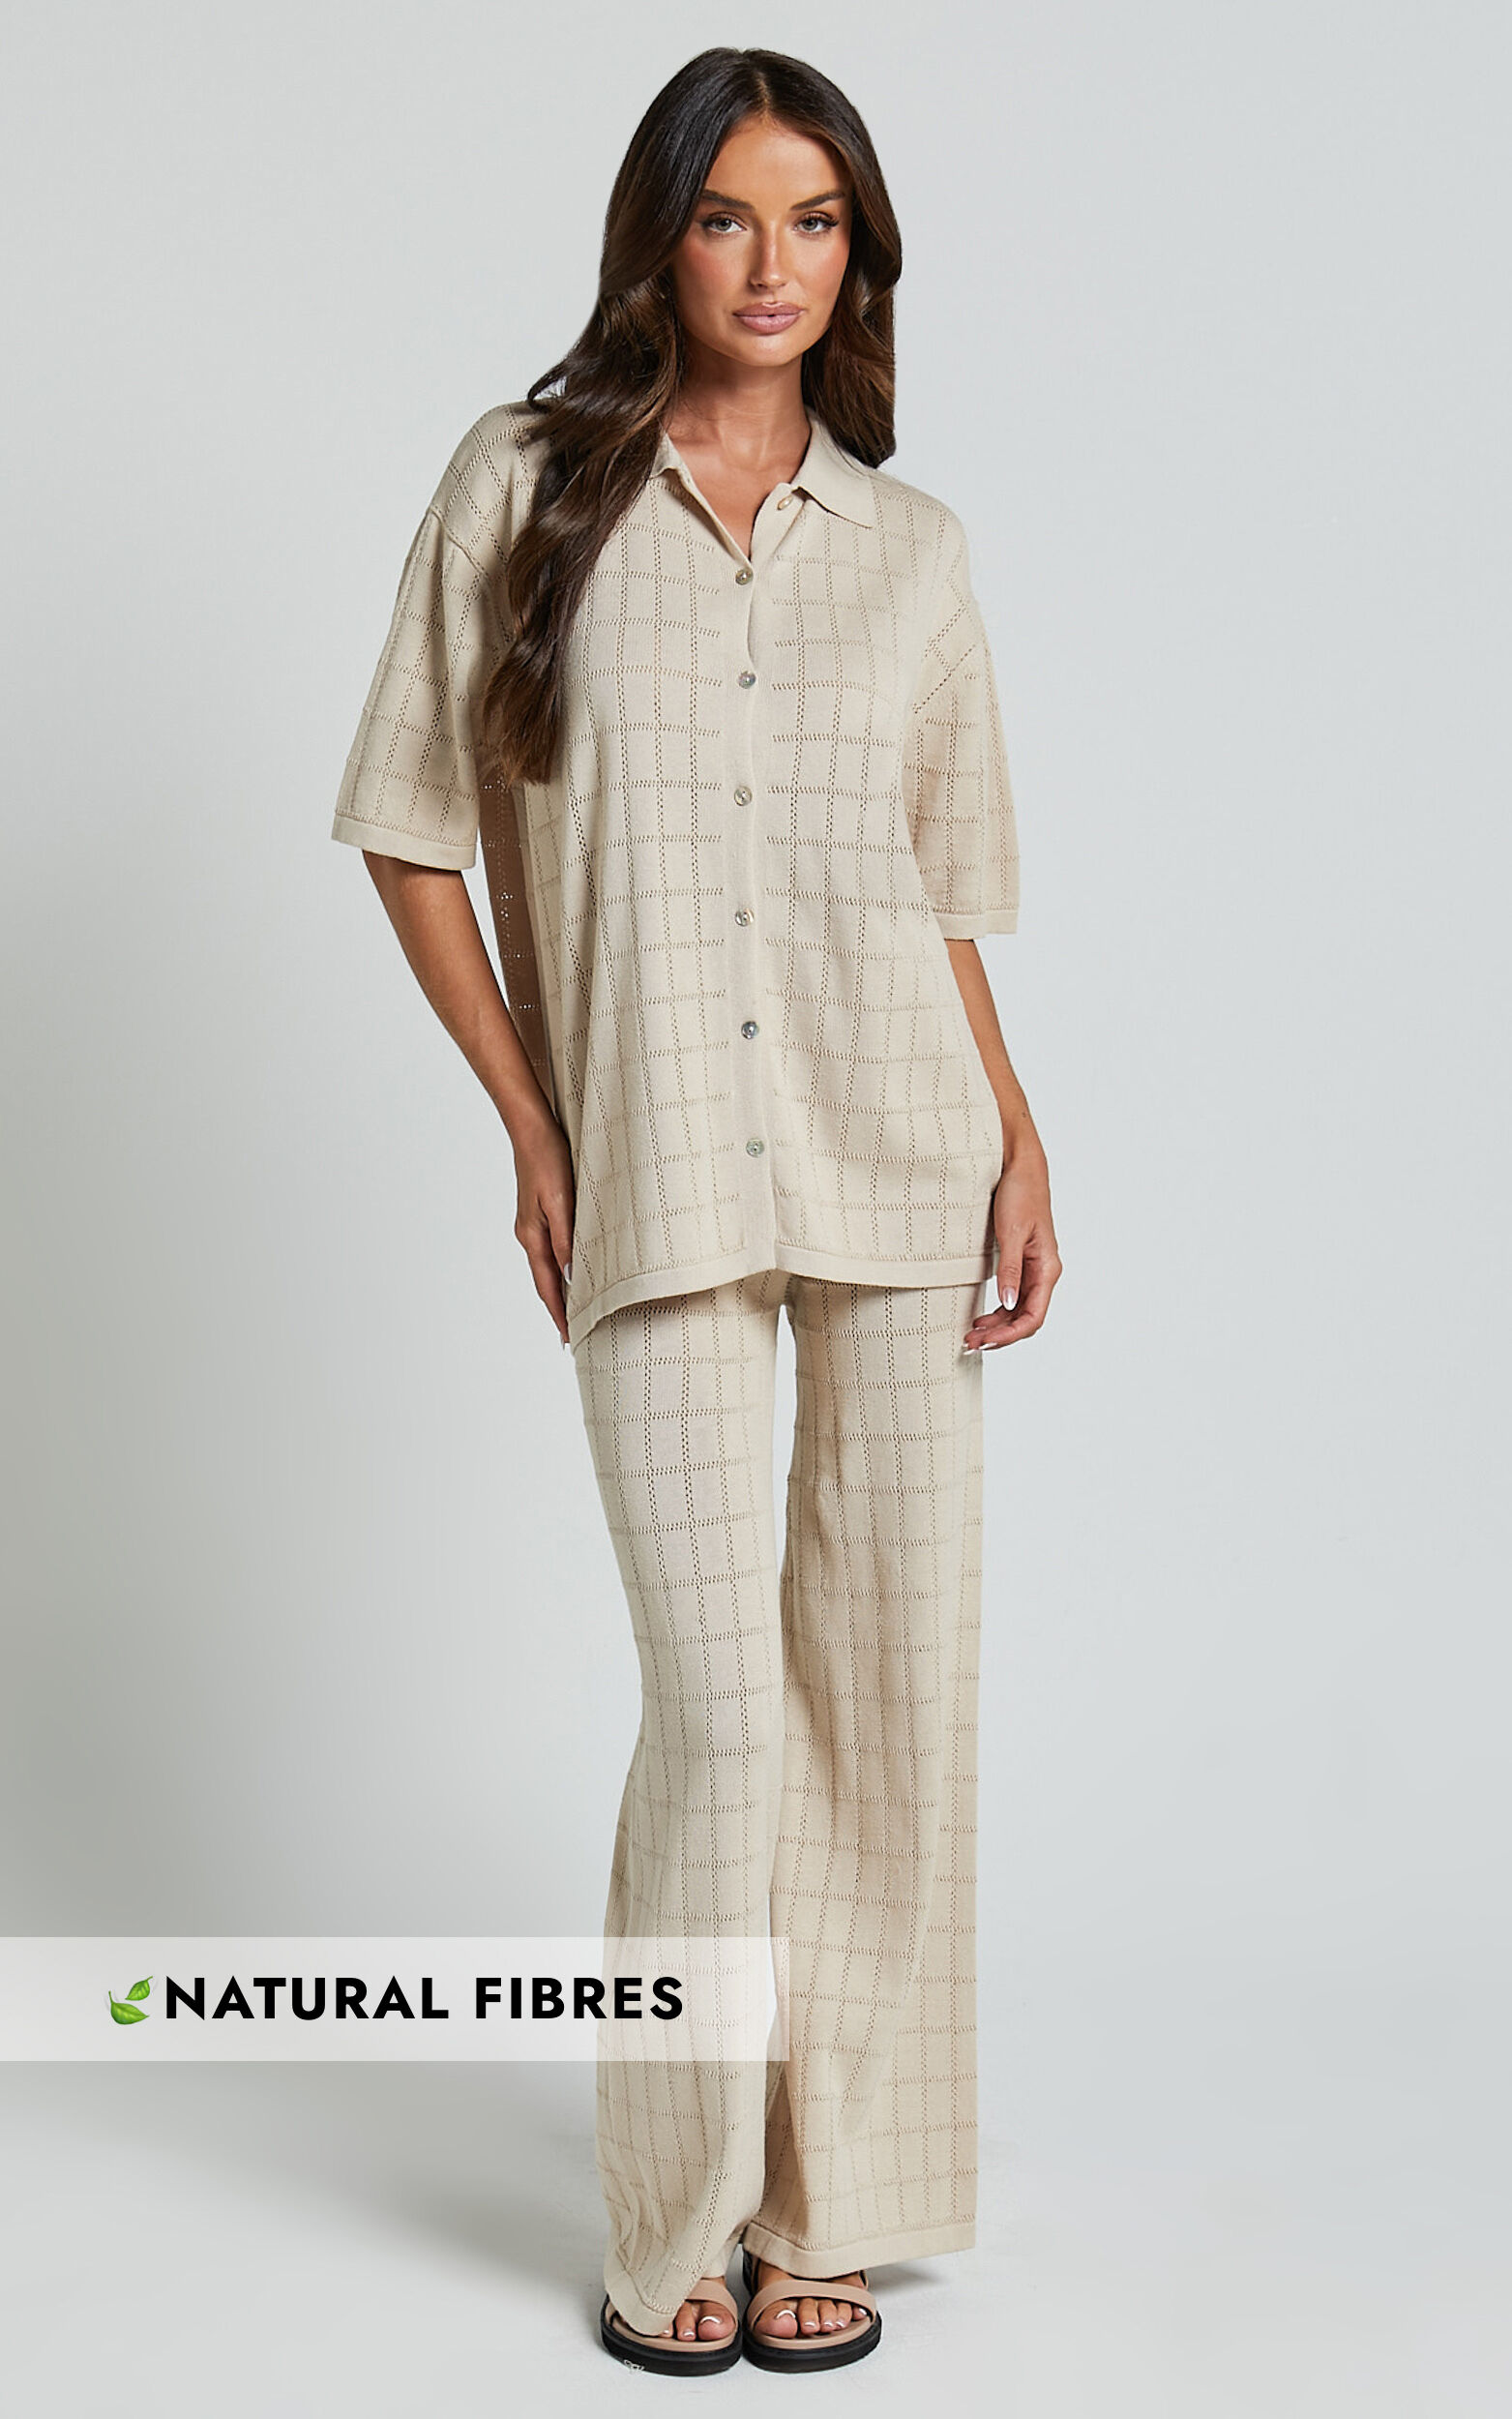 Tommy Two Piece Set - Knit Button Through Top and Pants Two Piece Set in Sand - 06, BRN2